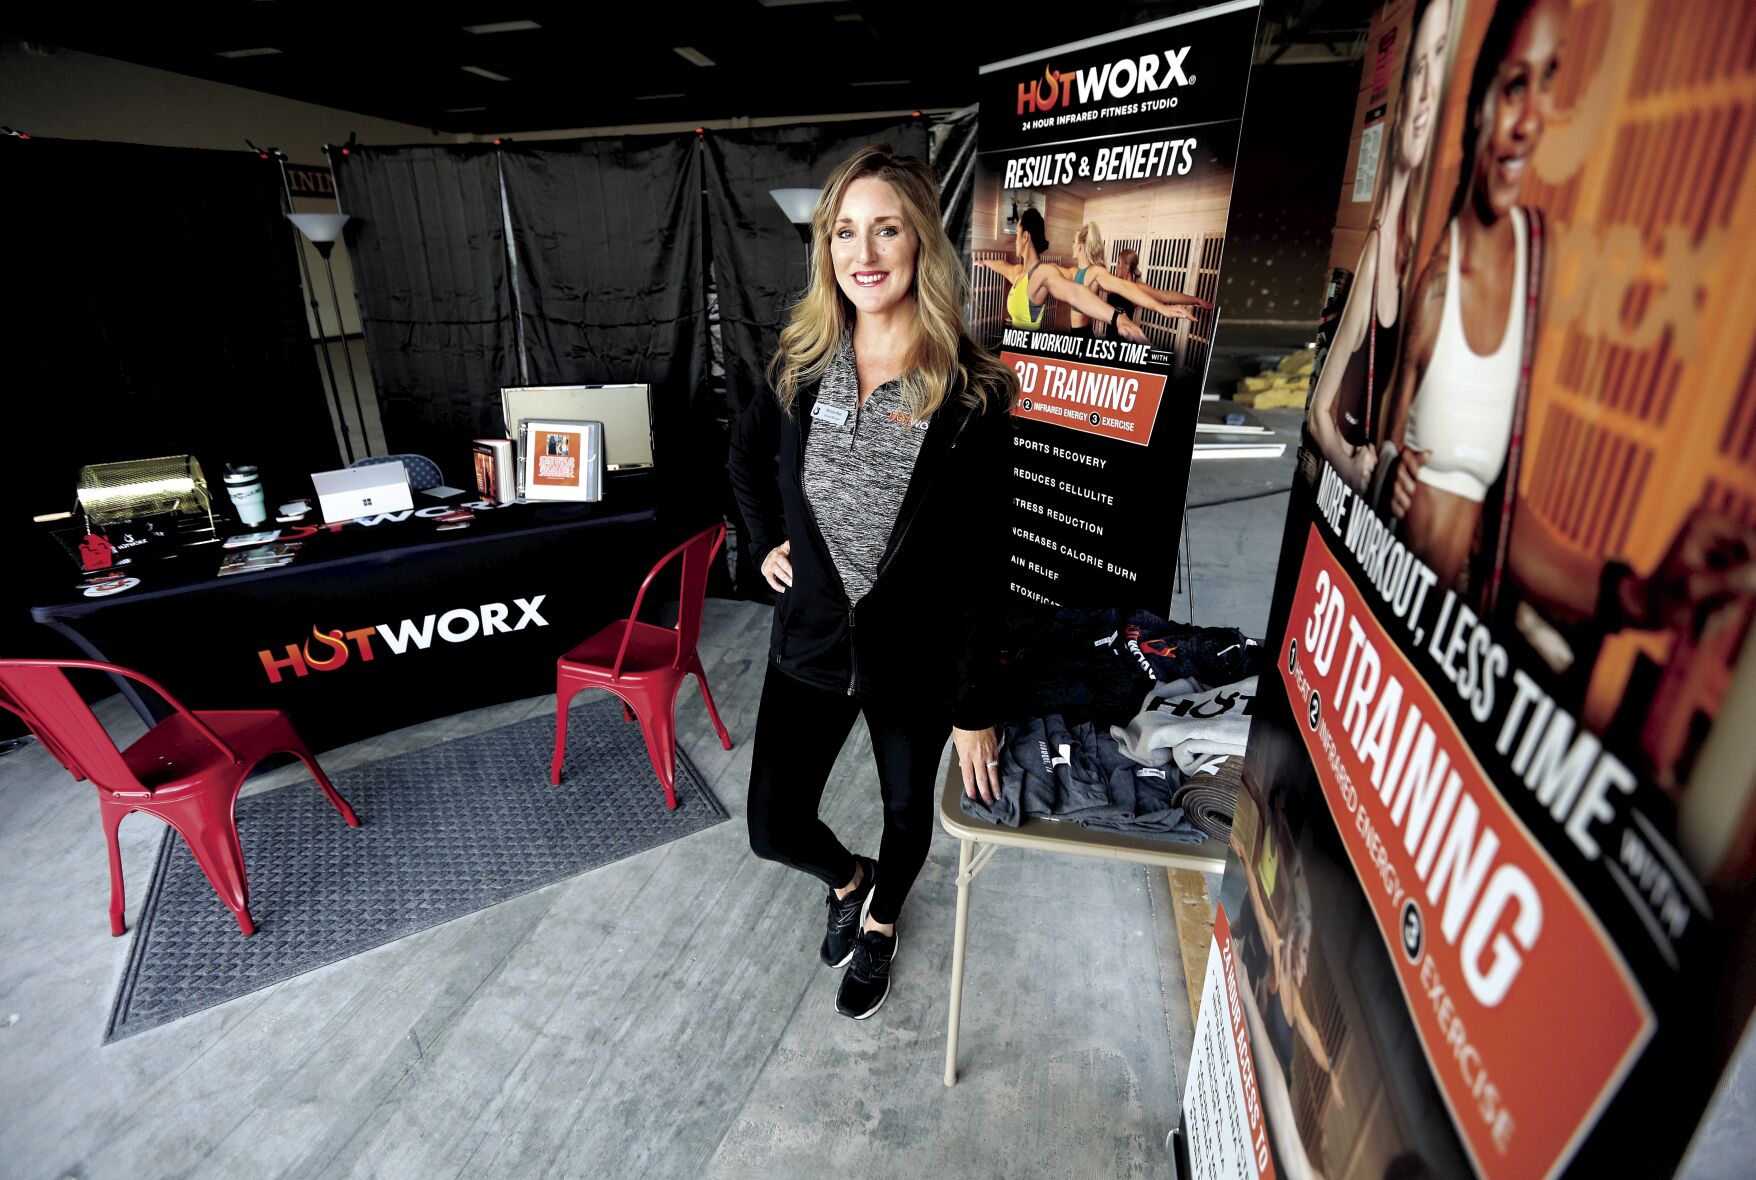 Melissa Noel is the general manager of the HOTWORX Studio, at 2055 Holliday Drive, that will open in early 2023.    PHOTO CREDIT: Dave Kettering